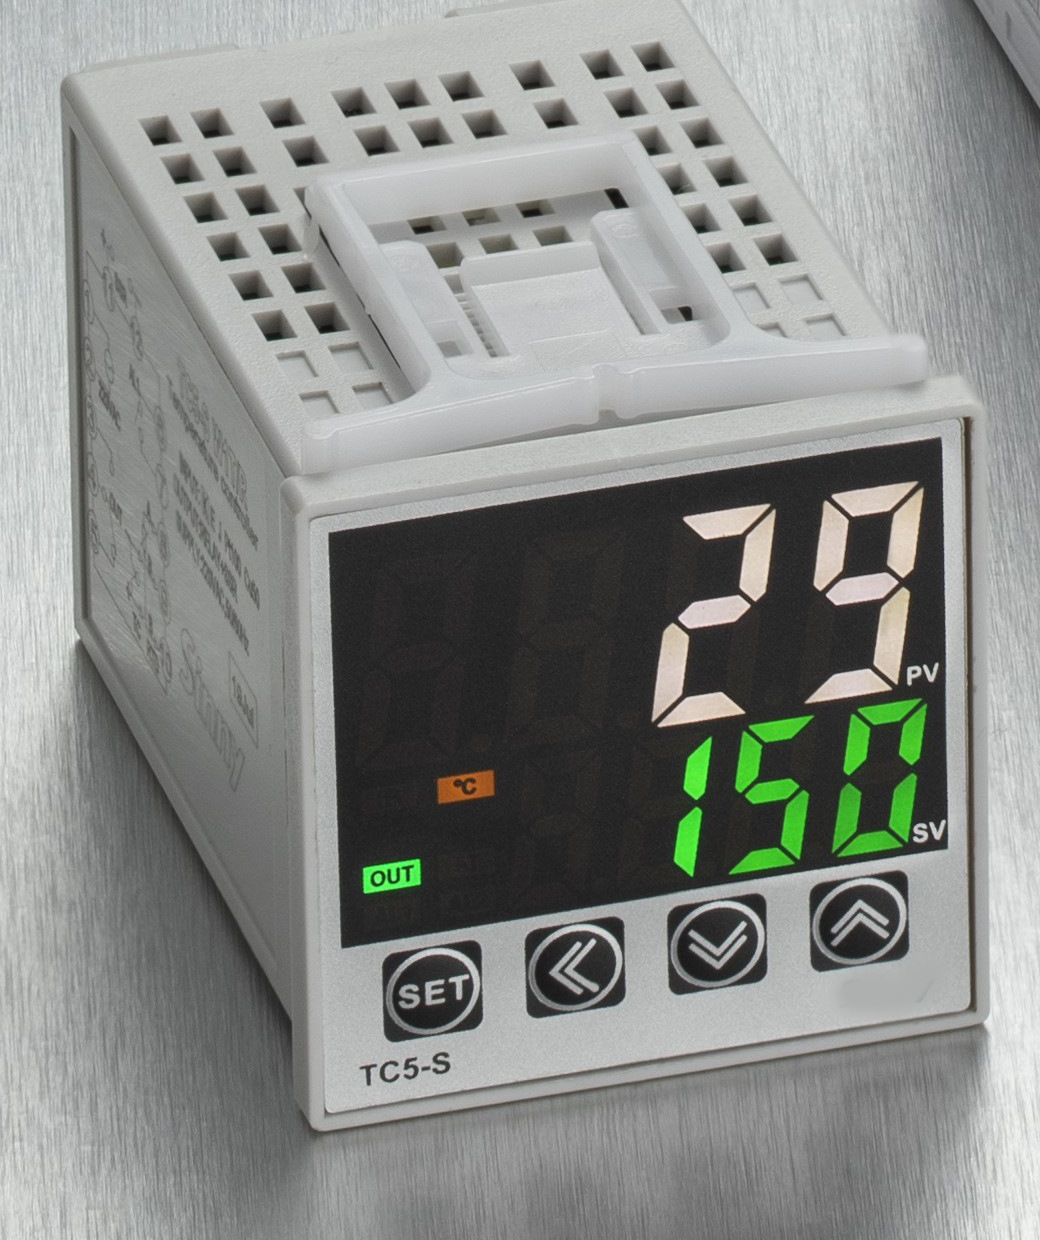 TC5-S-S-2-T/R-2, PID Controller, 100-240VAC with 2 3 Amp Relay Alarms, Multirange Type K,E,J Thermocouple, and PT100/Cu20 RTD Input, Pt100 or Cu20, 48x48mm,12VDC Output